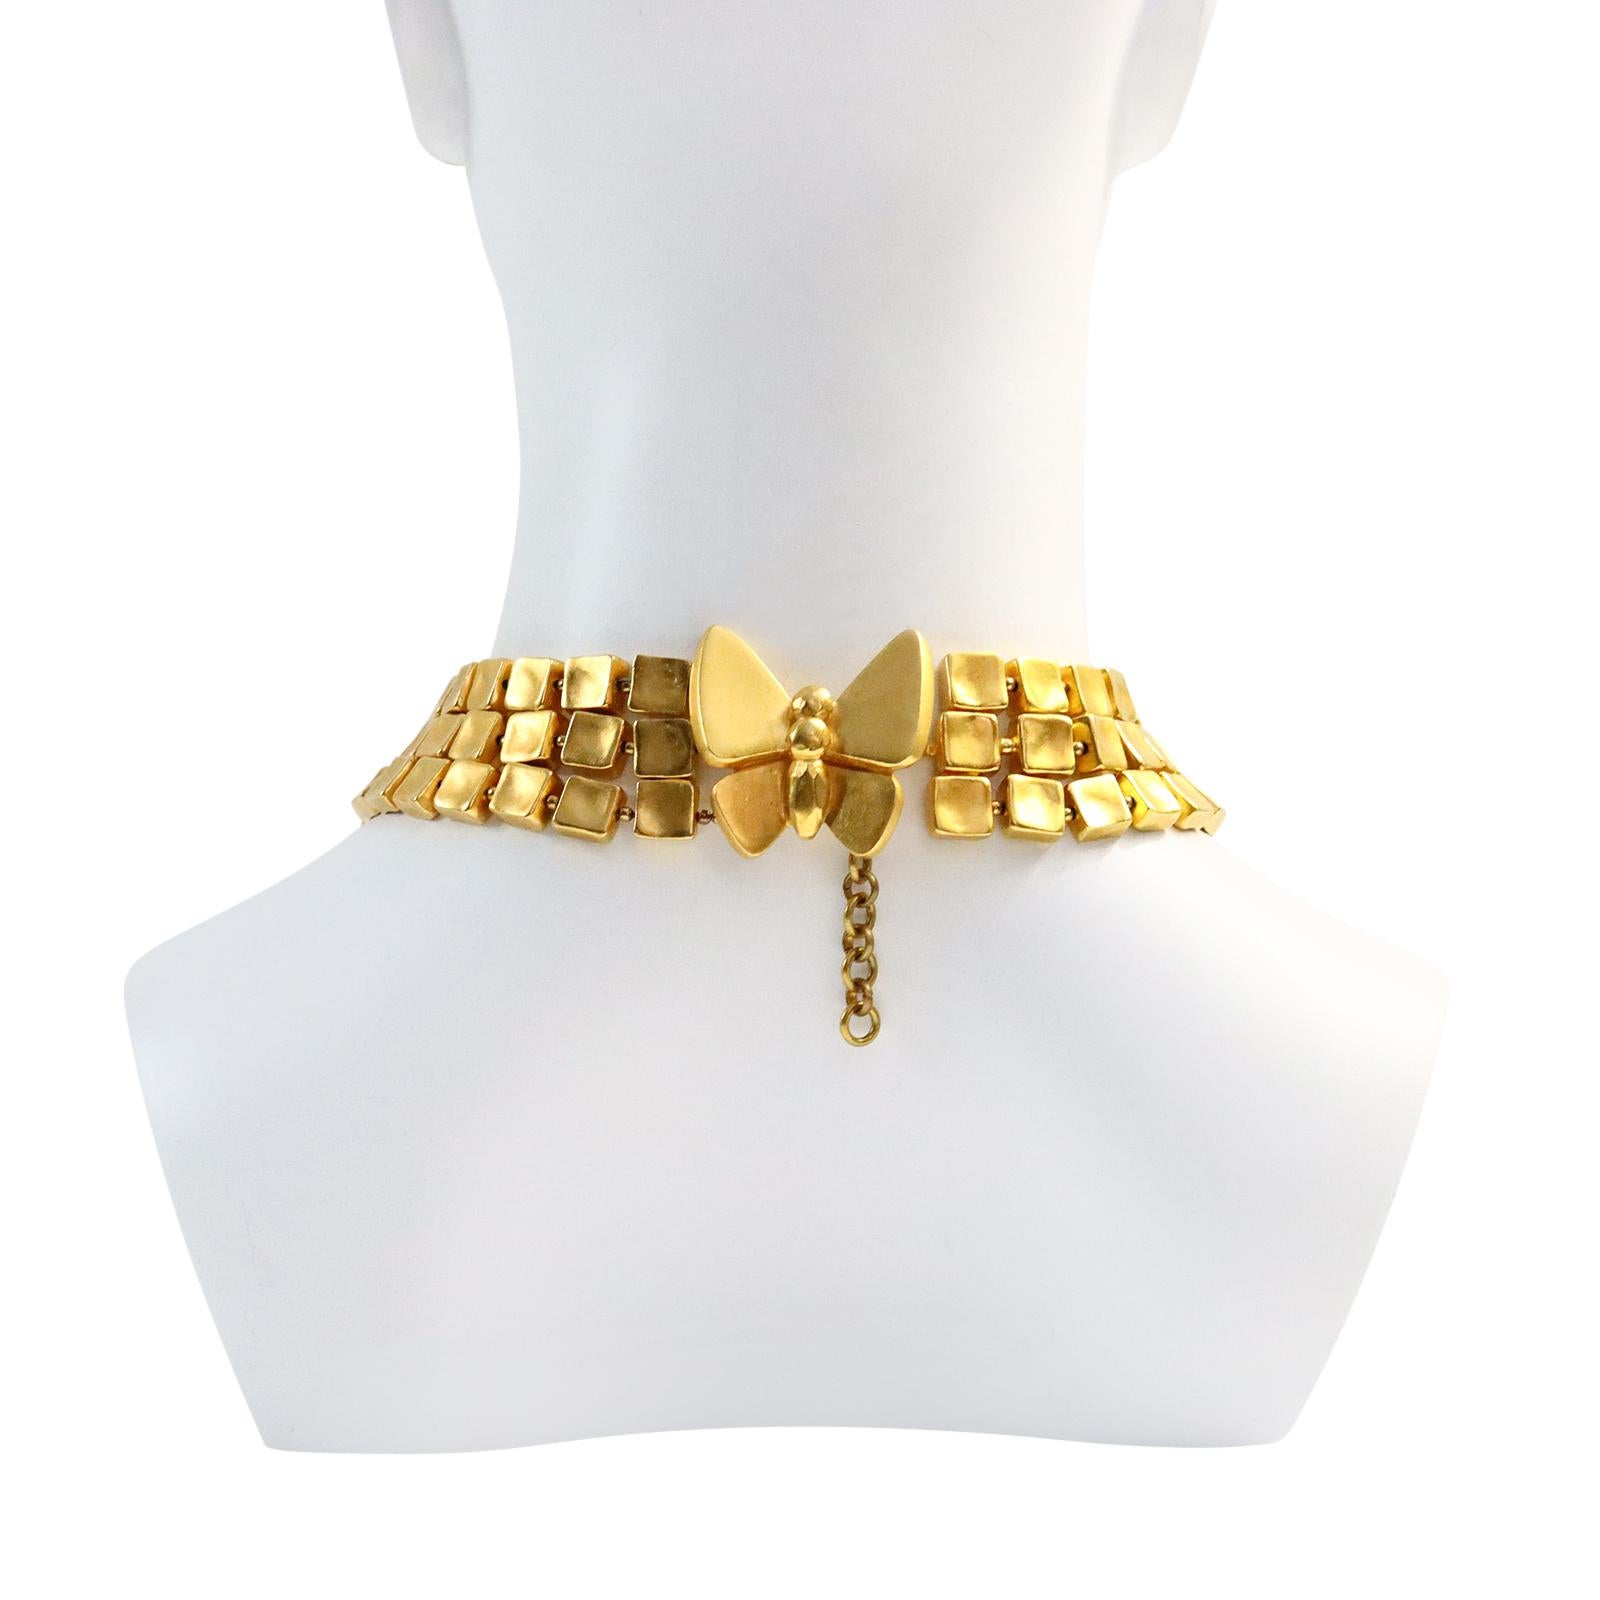 Artist Vintage Lanvin Gold Tone Necklace with Butterfly Clasp Necklace Circa 1980s For Sale